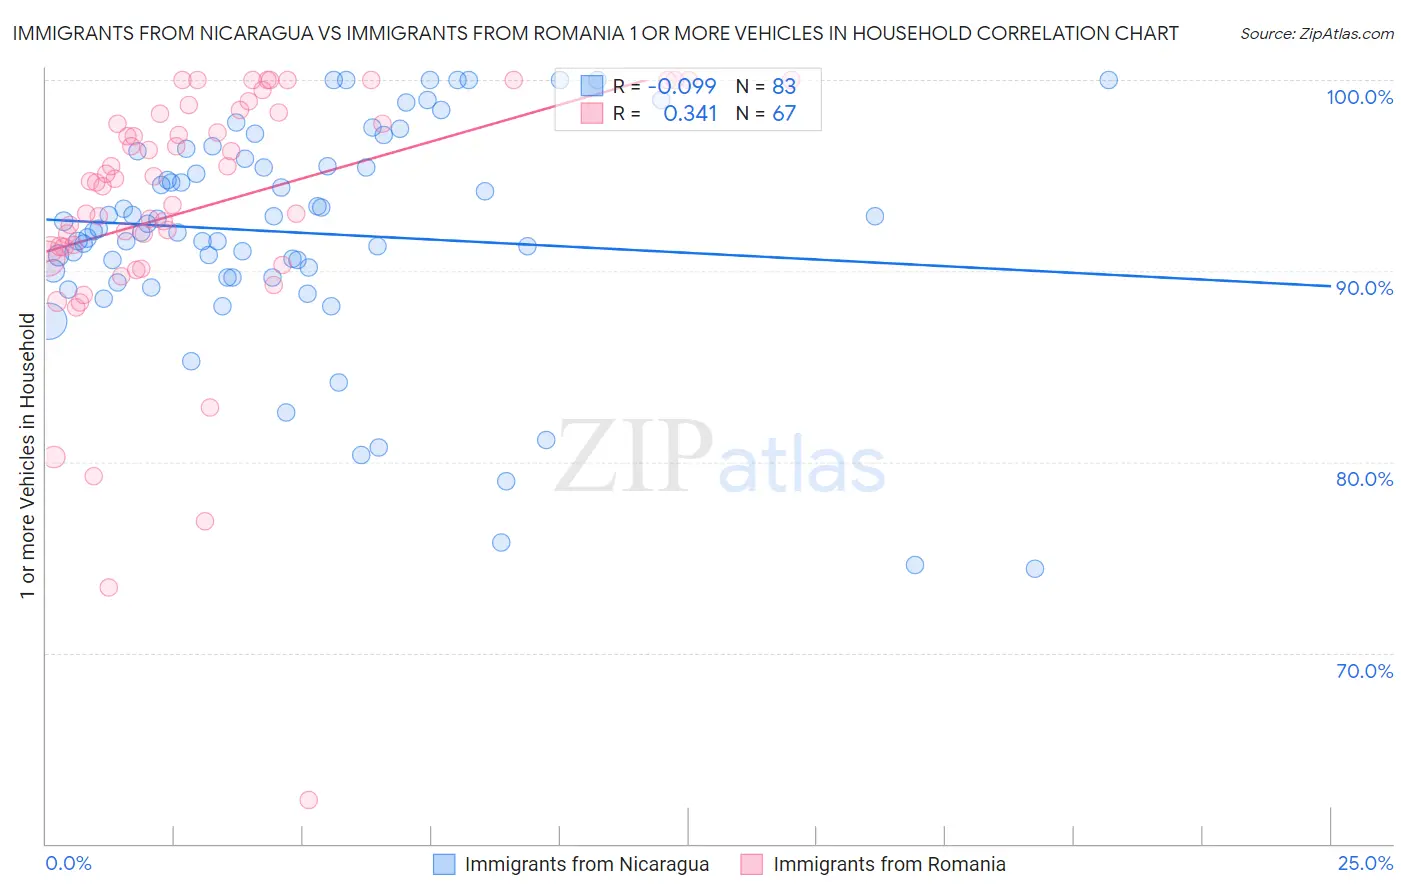 Immigrants from Nicaragua vs Immigrants from Romania 1 or more Vehicles in Household